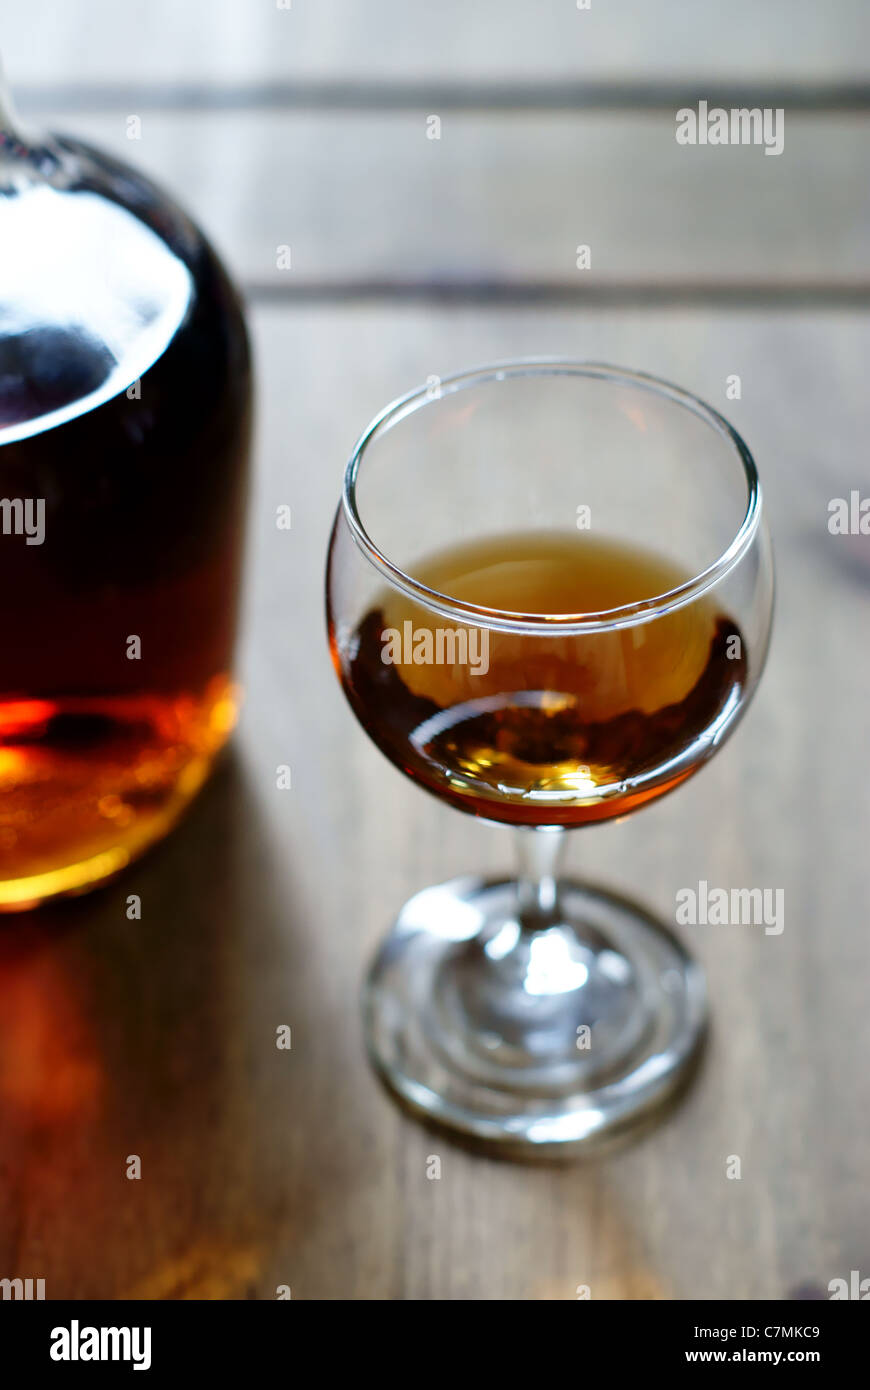 A bottle of alcohol or liquor and a measure in a glass equivalent to one unit of alcohol Stock Photo